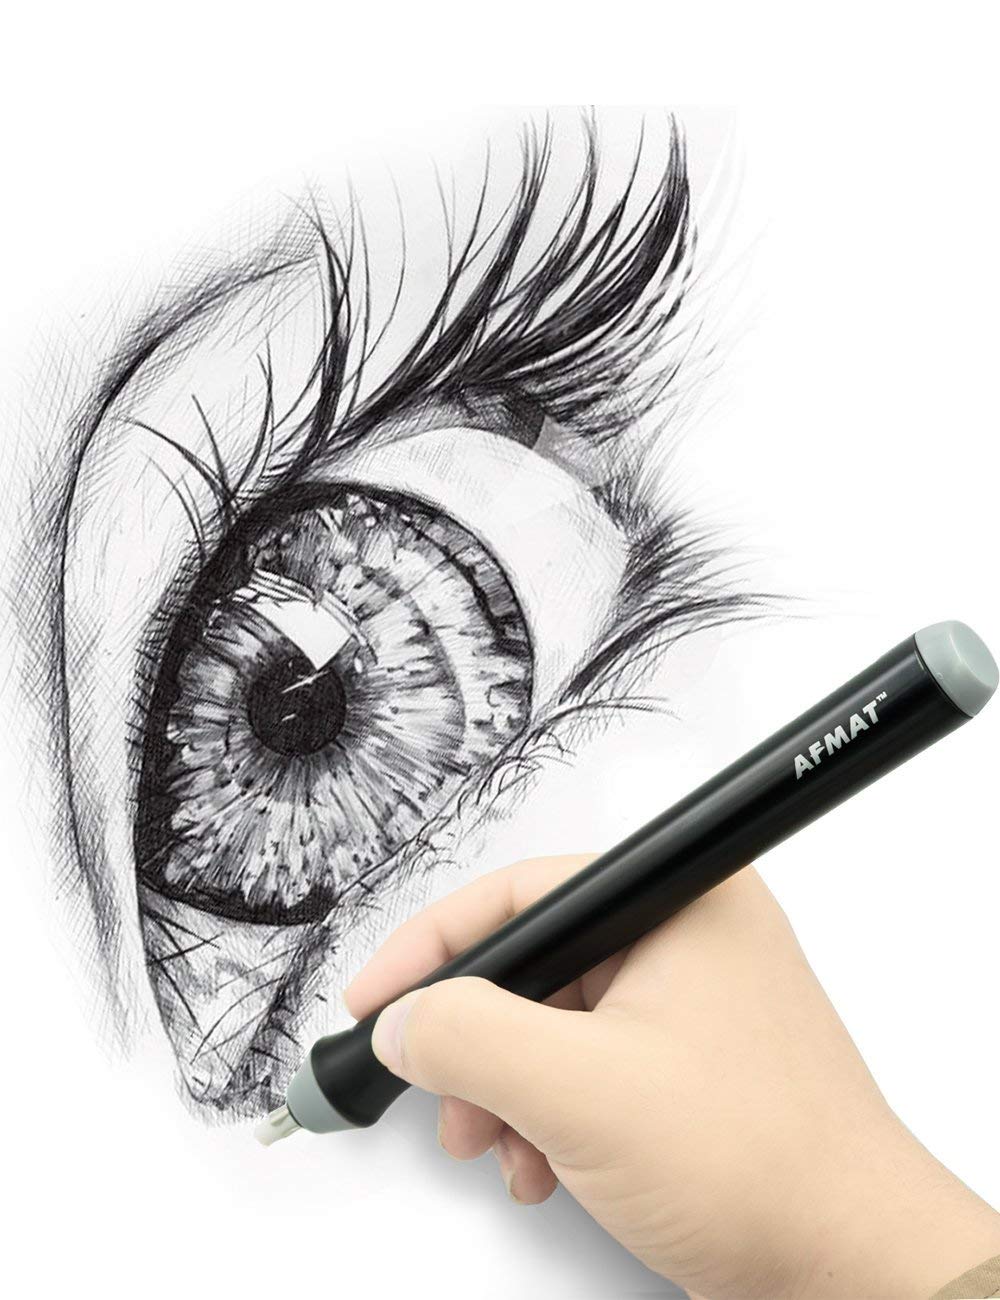 Electric Sketch Drawing Eraser  Battery Operated Pencil Eraser